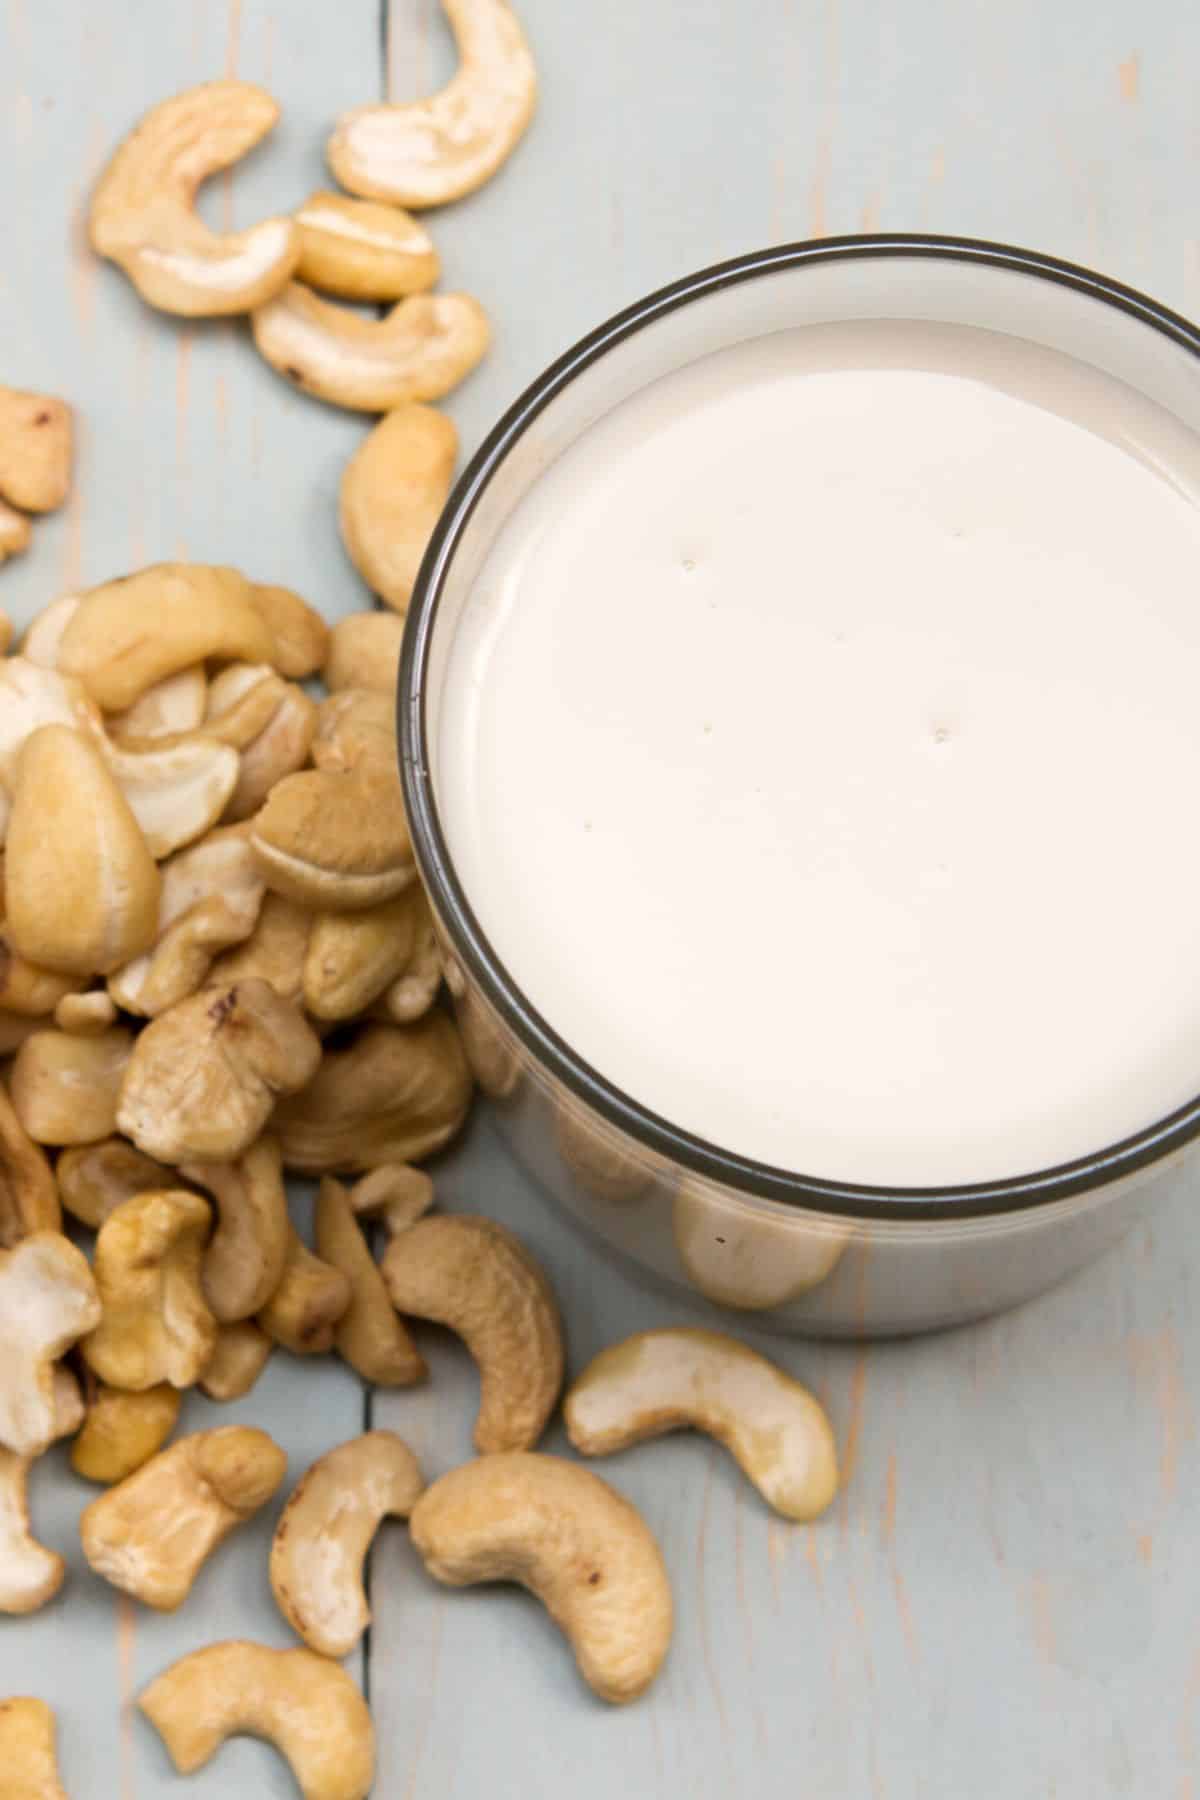 a glass of cashew cream surrounded by cashews on a table.